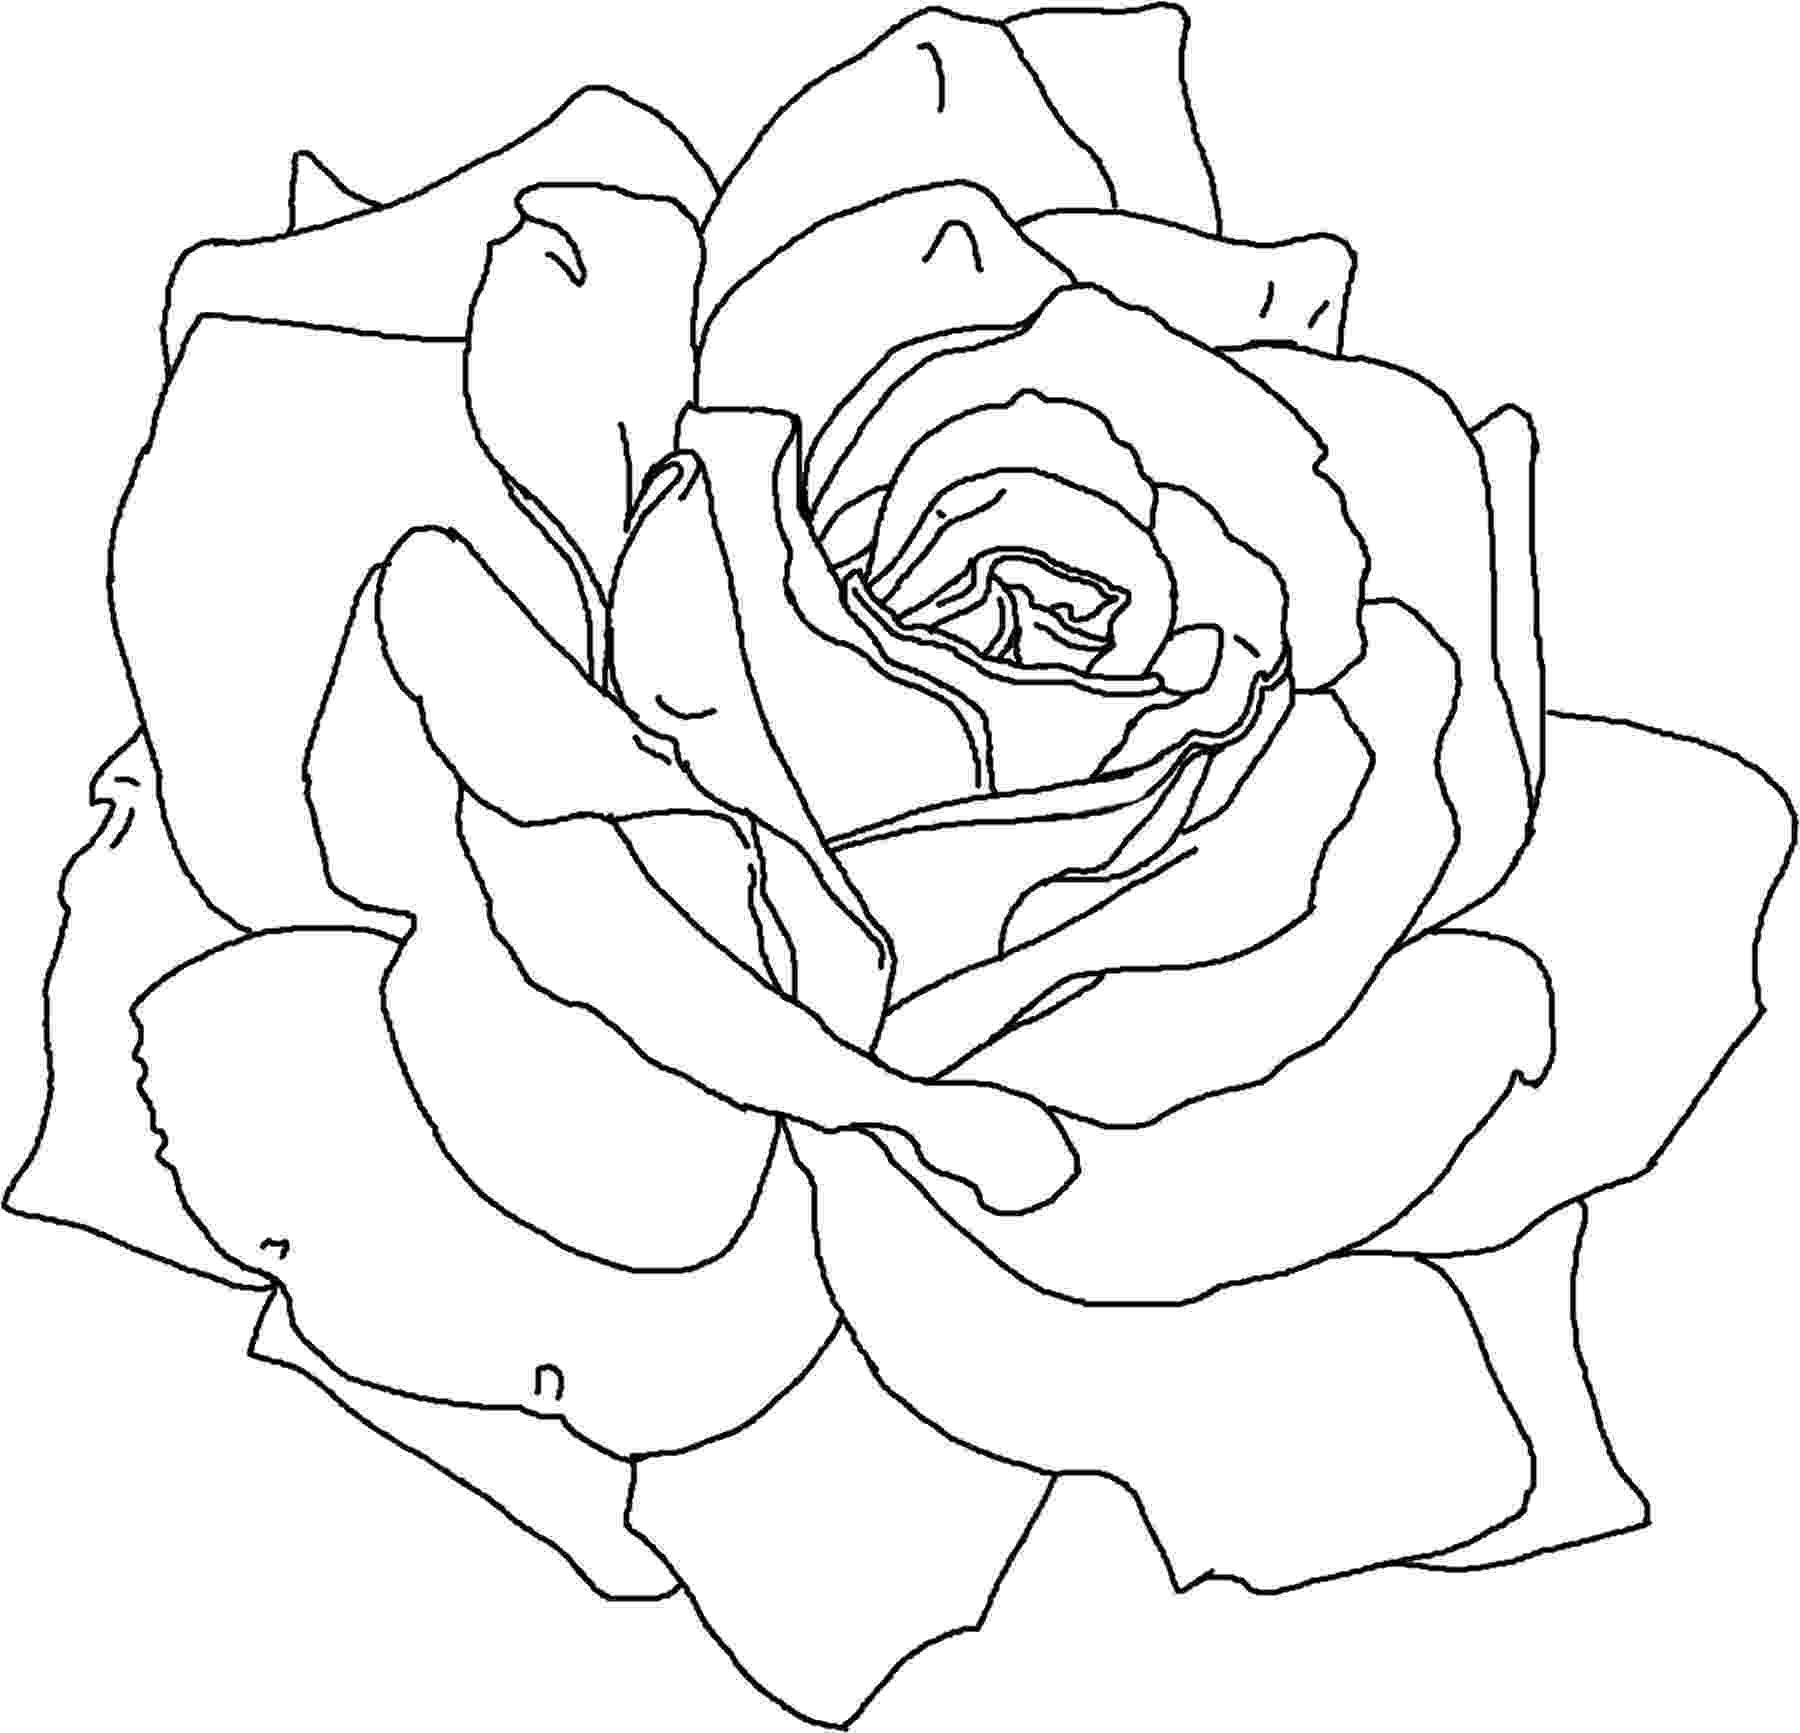 printable rose coloring pages roses coloring pages getcoloringpagescom rose printable pages coloring 